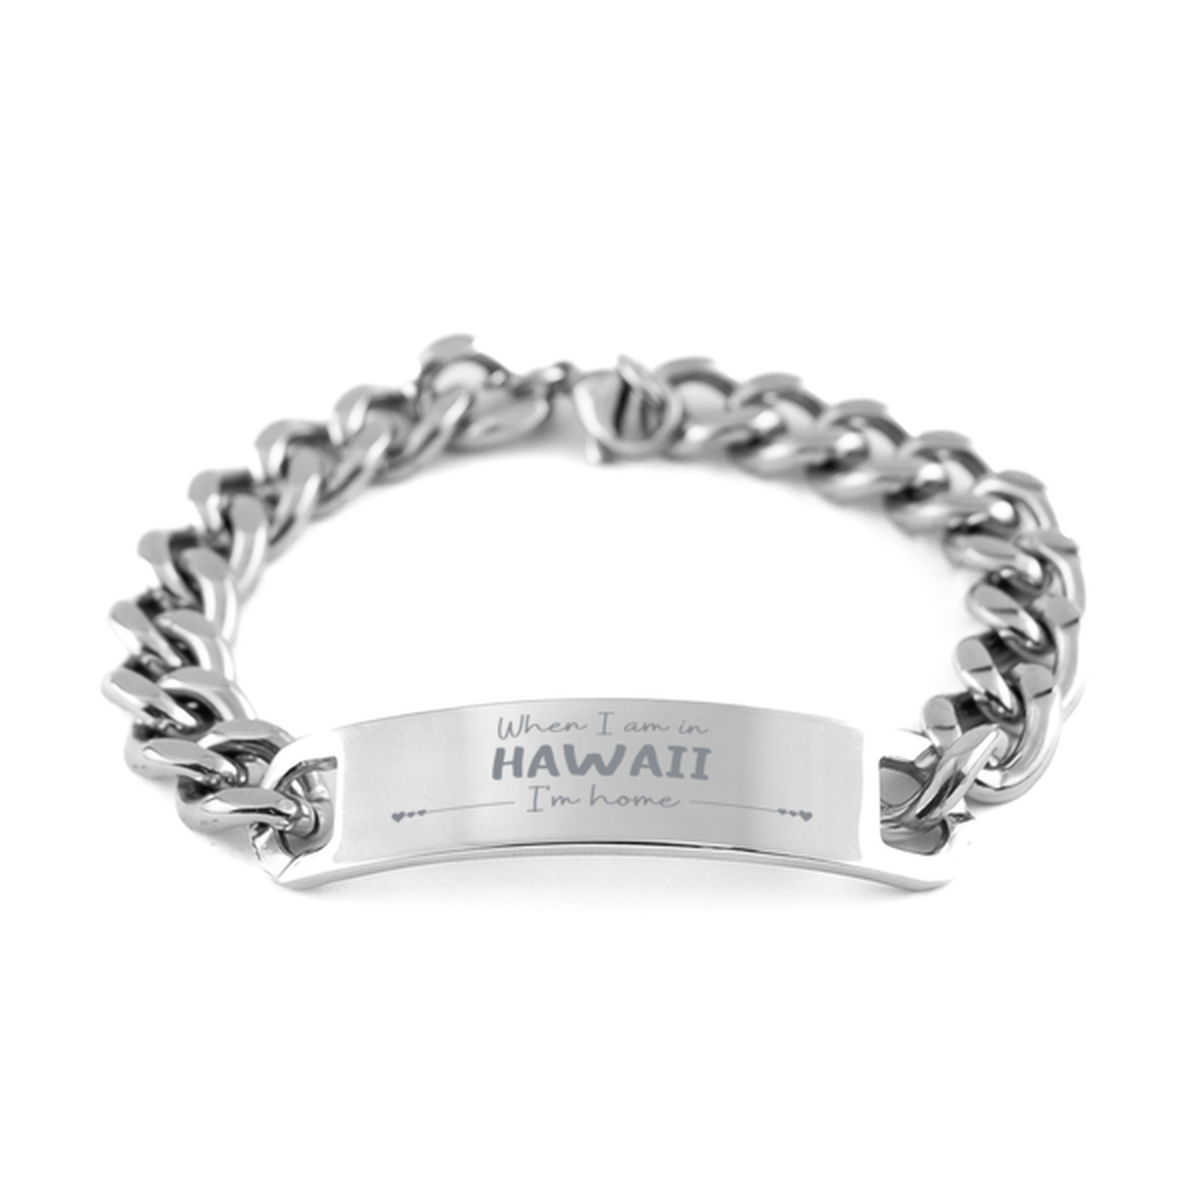 When I am in Hawaii I'm home Cuban Chain Stainless Steel Bracelet, Cheap Gifts For Hawaii, State Hawaii Birthday Gifts for Friends Coworker